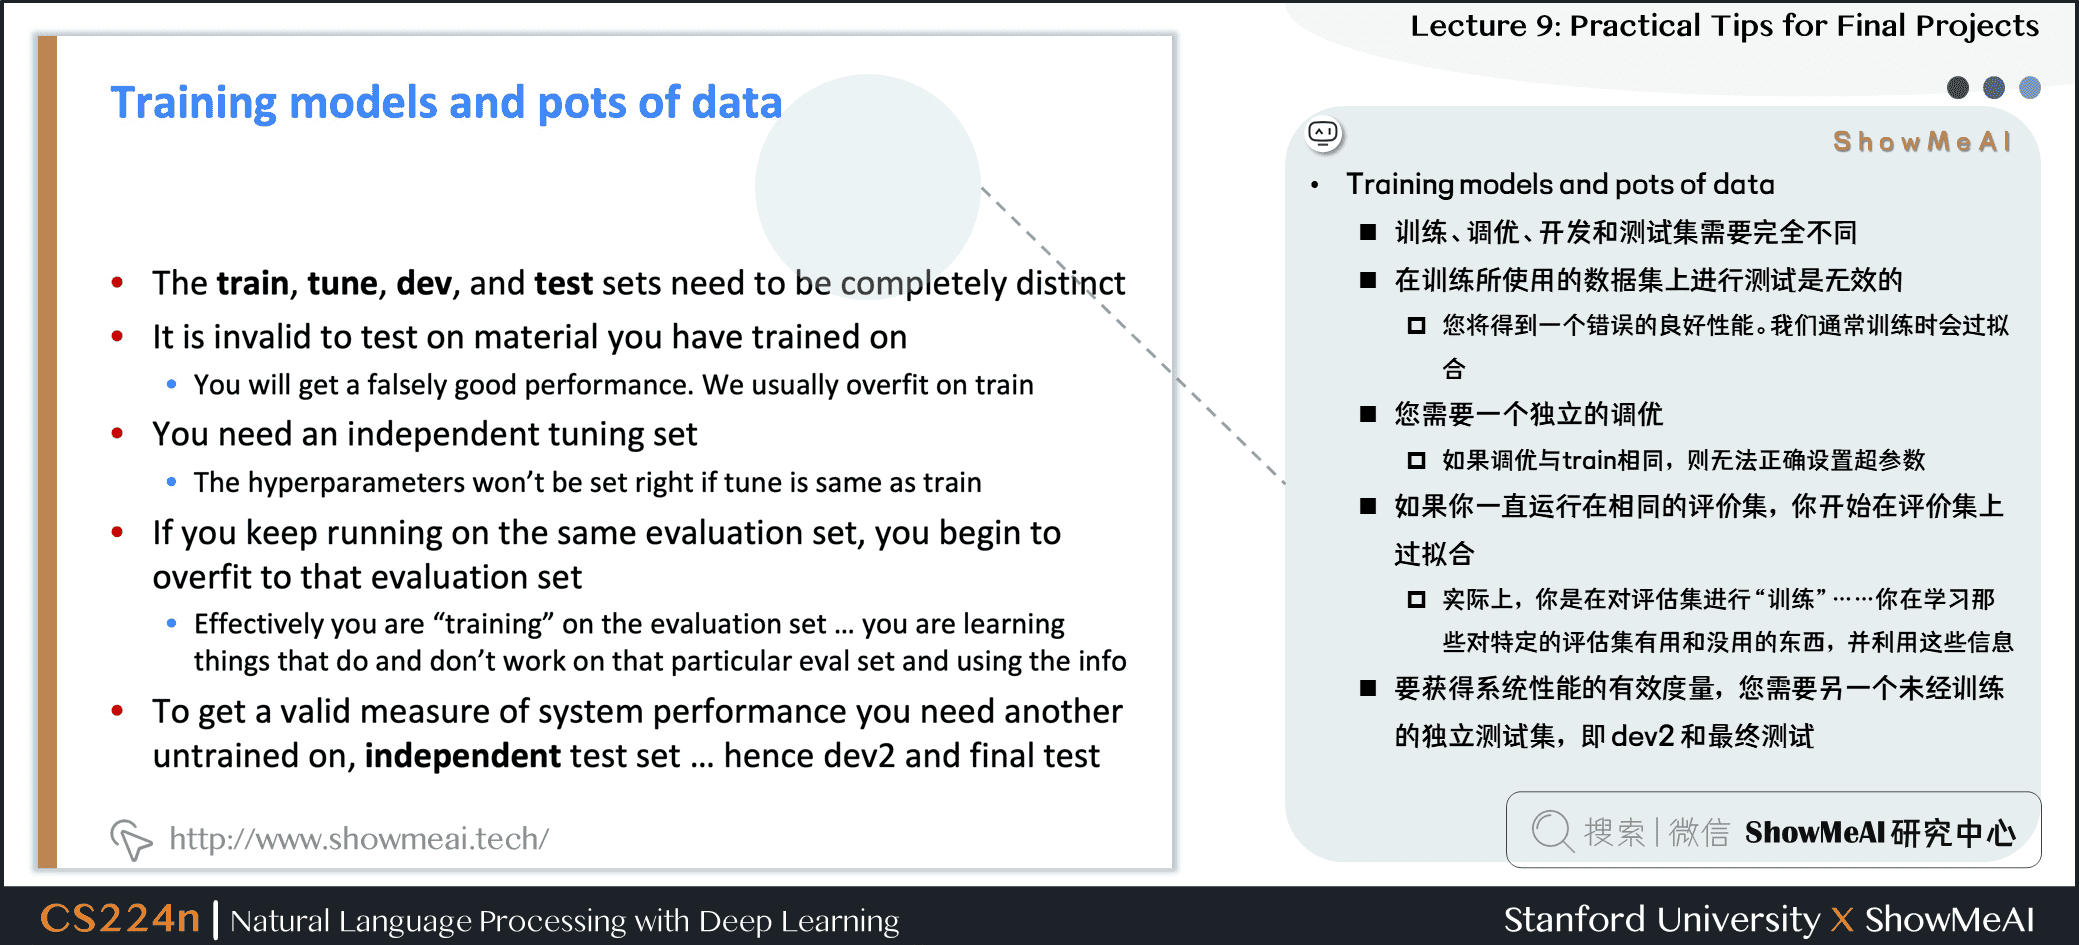 Training models and pots of data